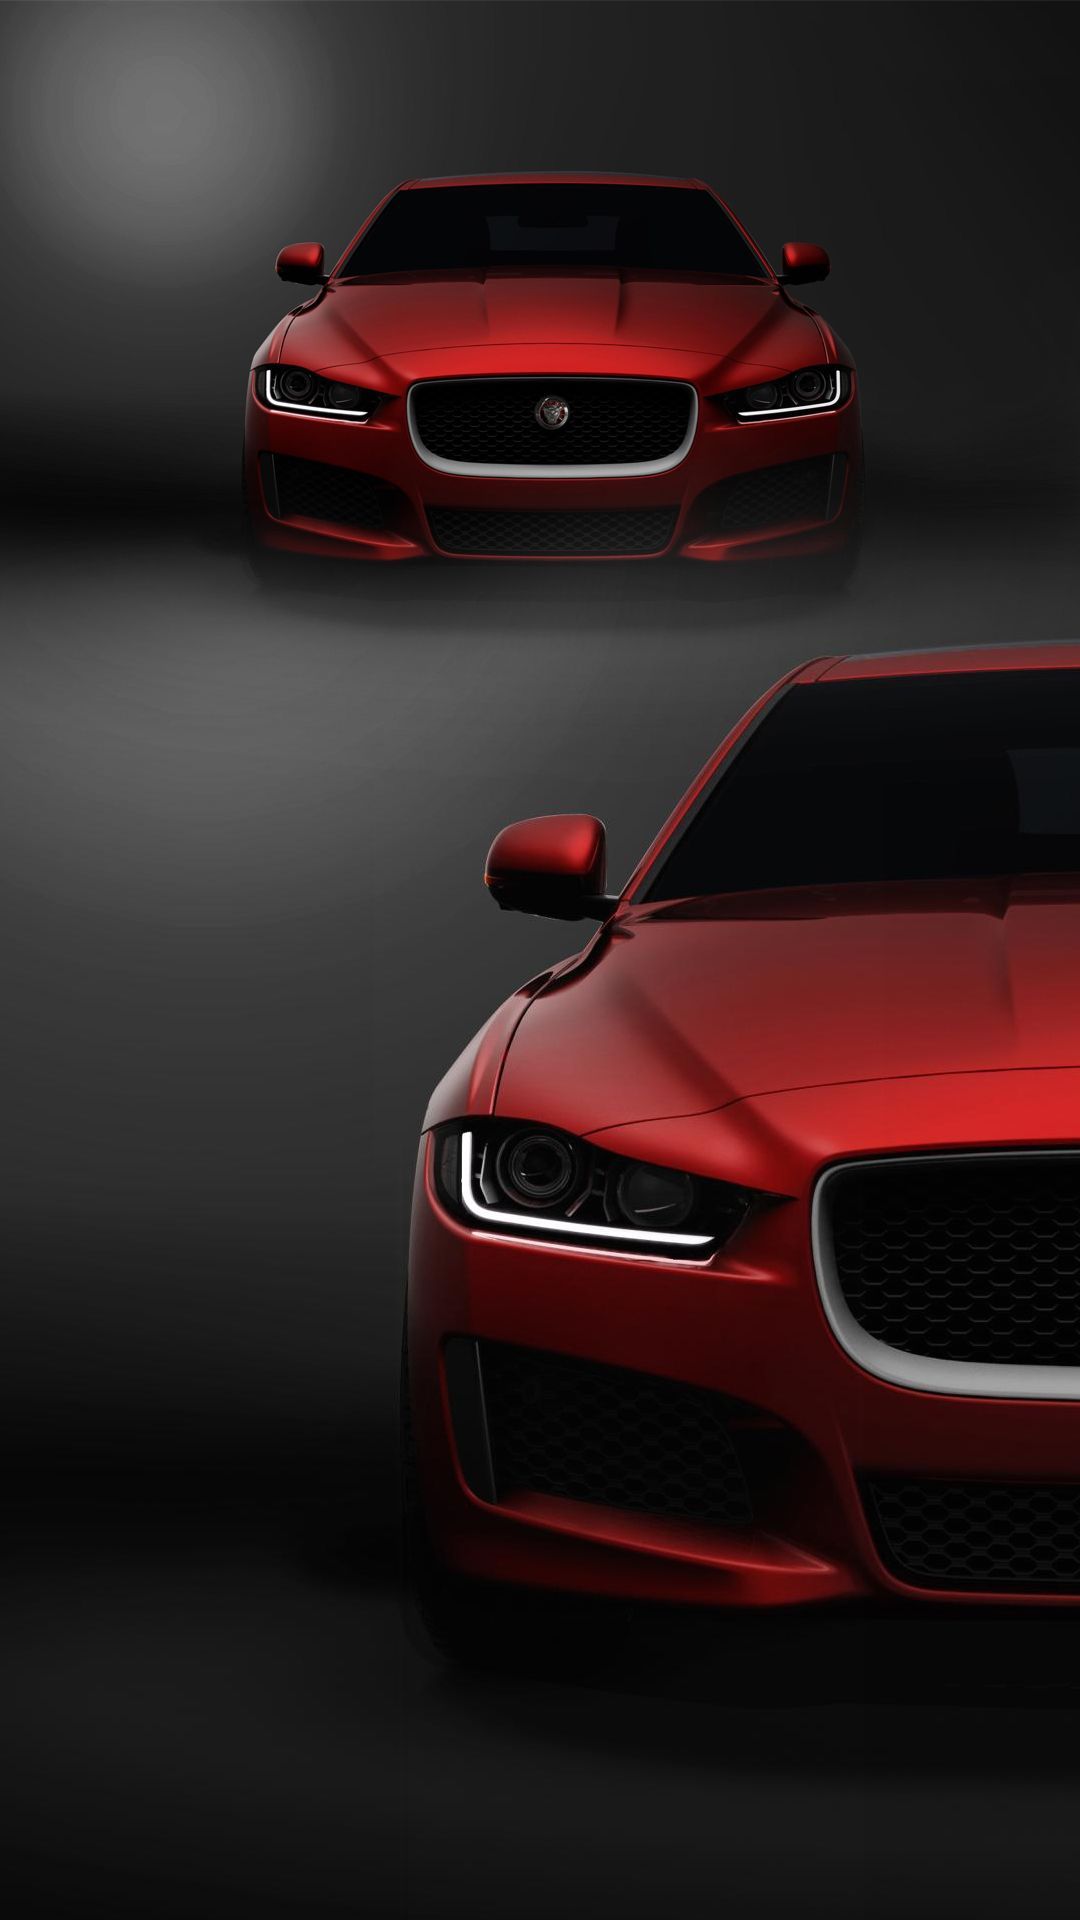 These are 5 Image about Red Car Wallpaper HD For MobileDownload